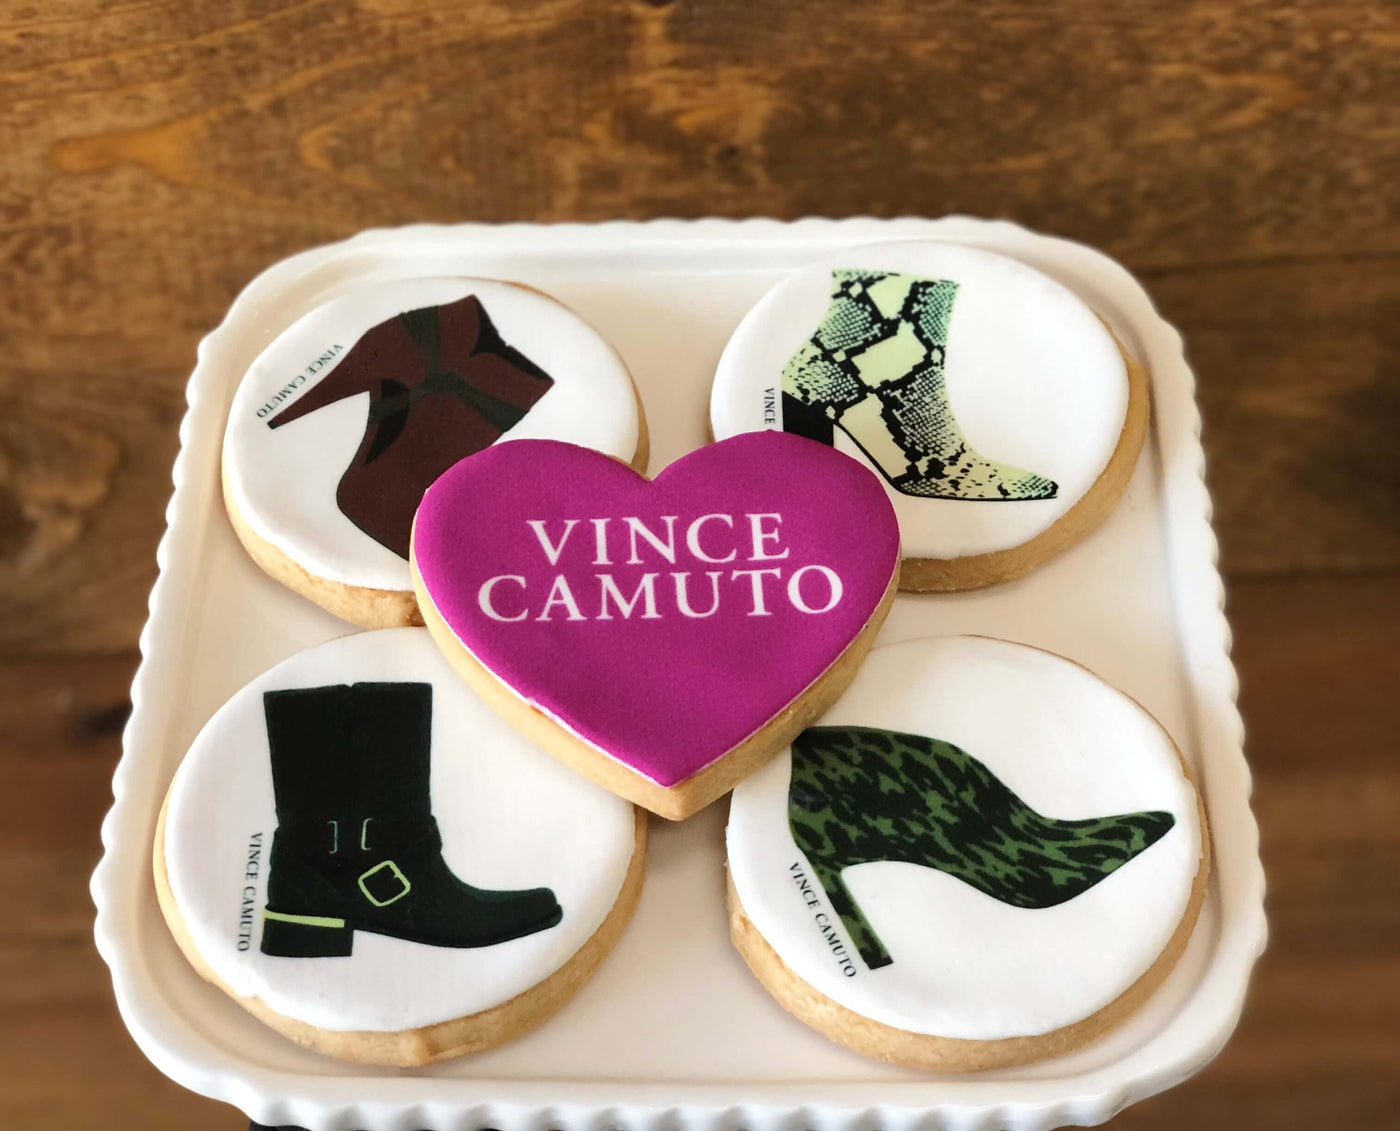 Vince Camuto Boot Logo Cookies